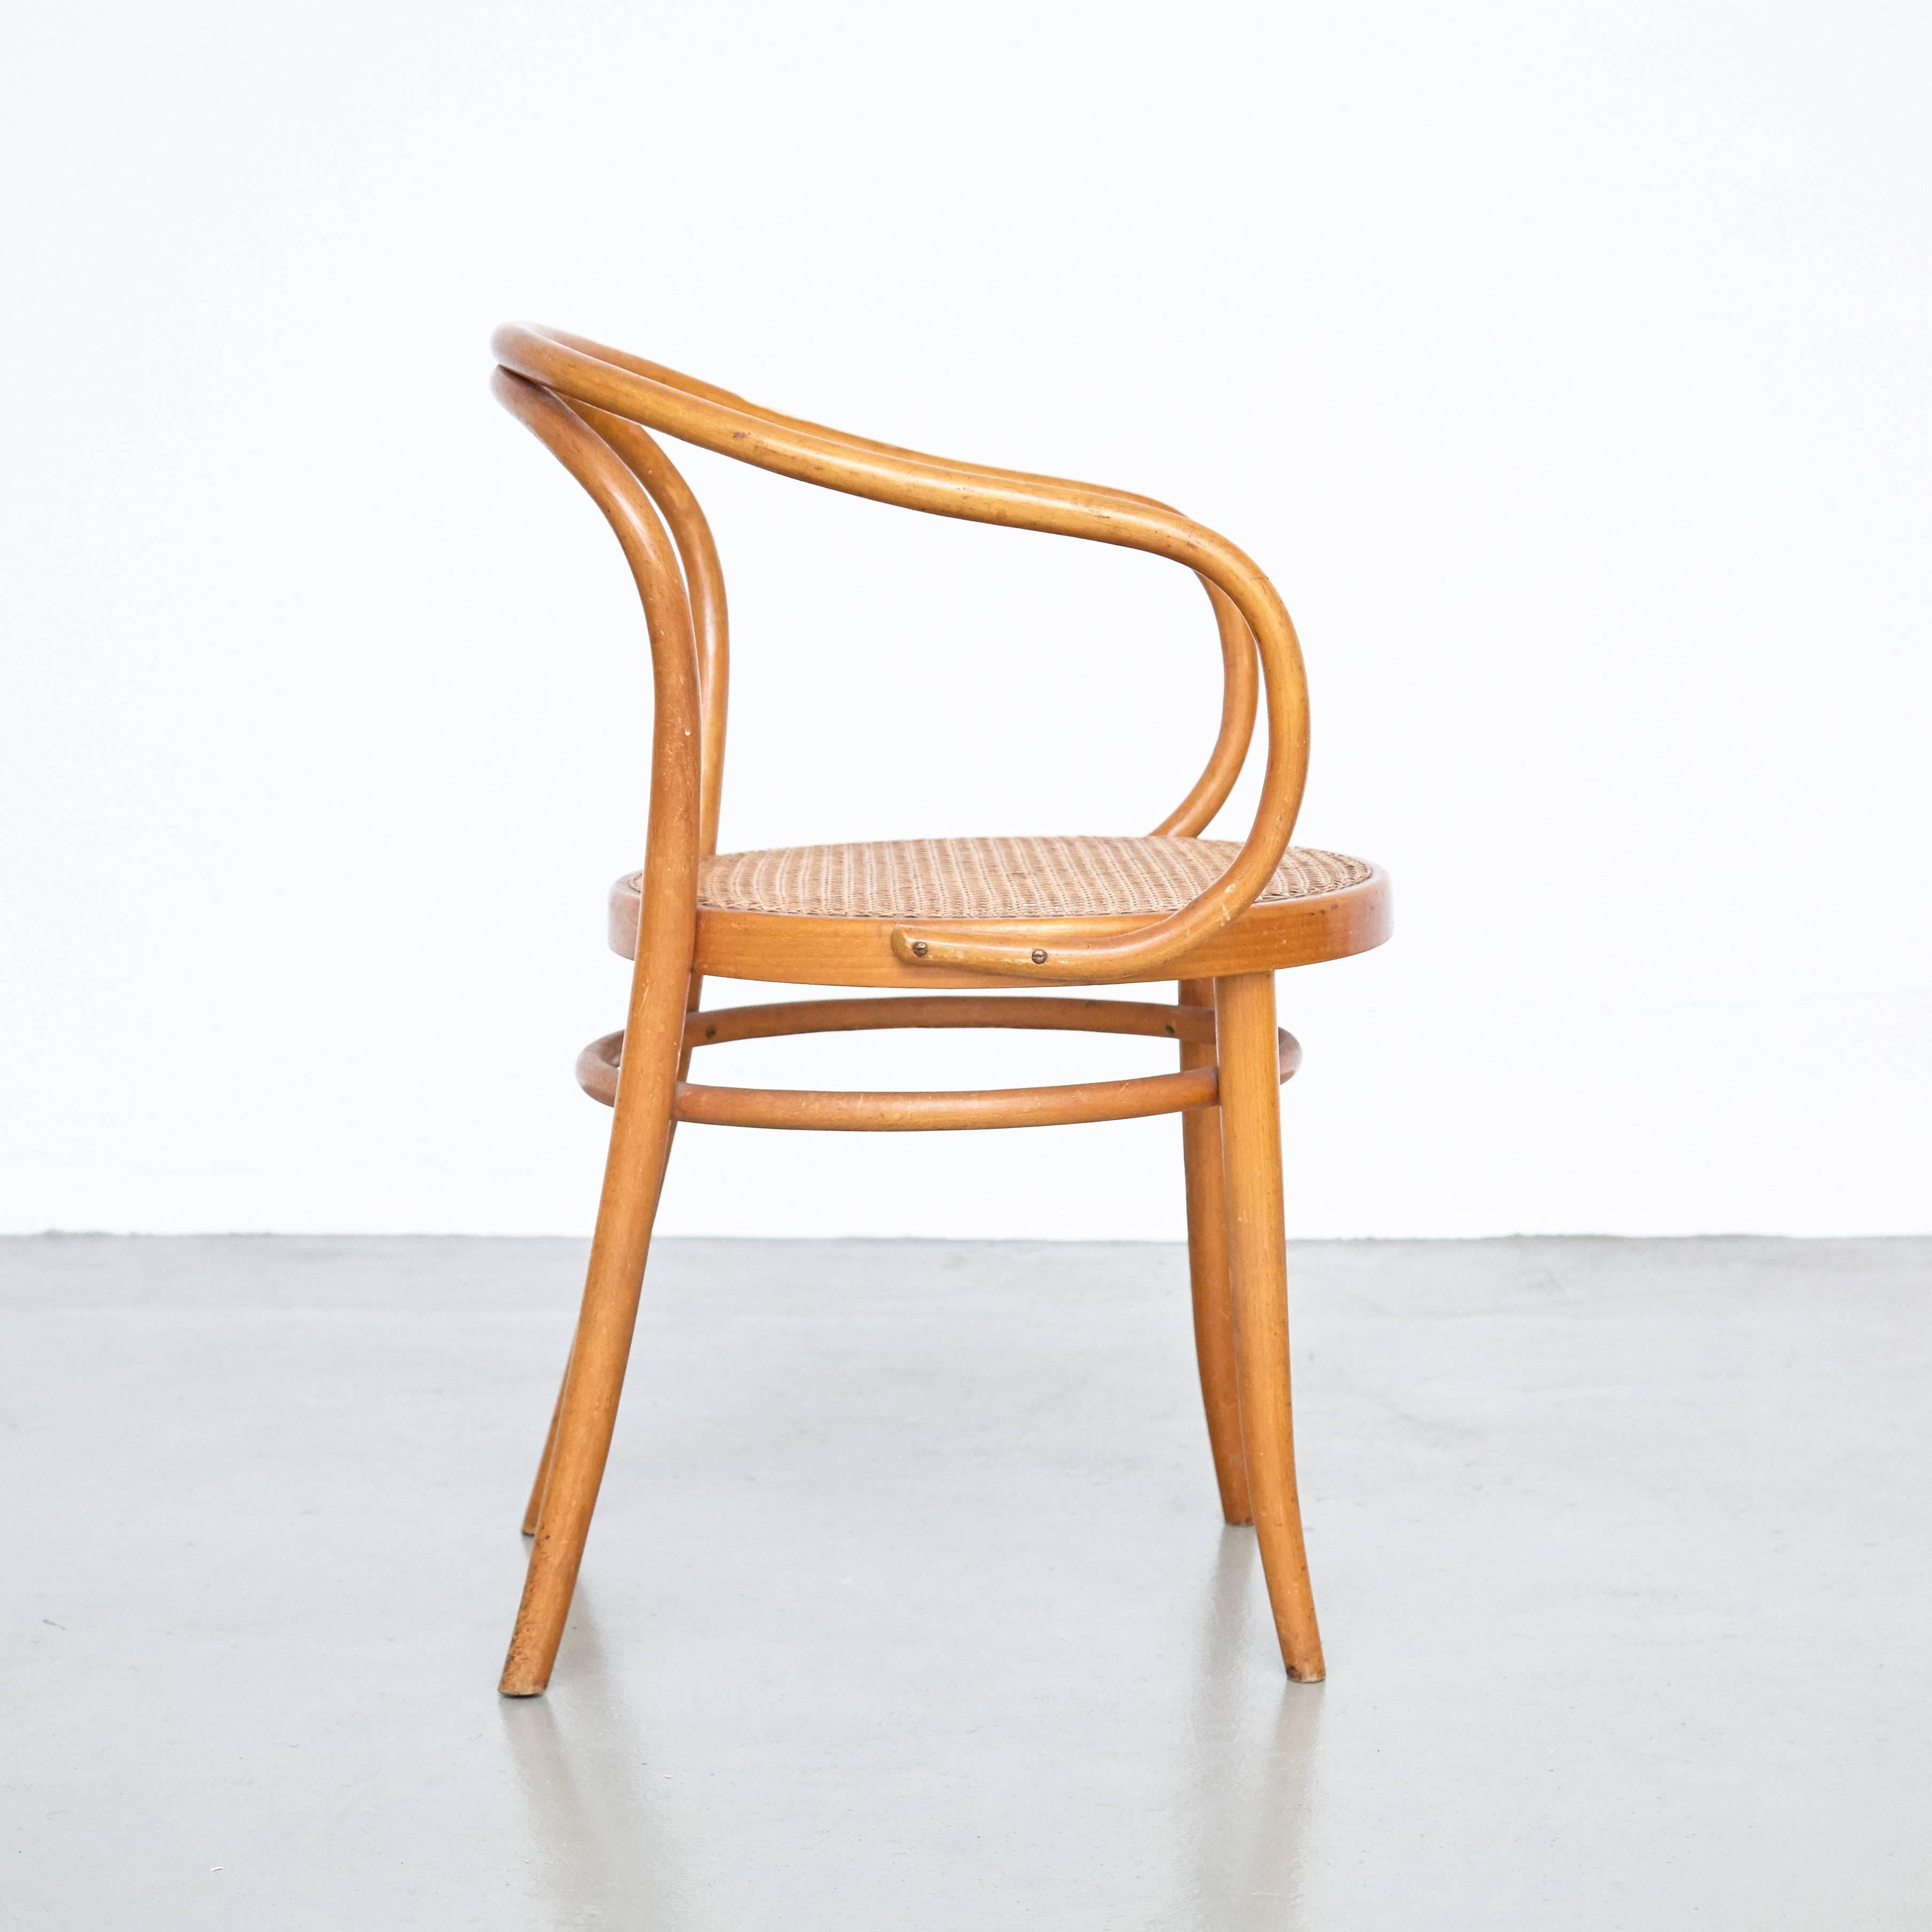 Chair designed by Ligna in the style of Thonet, circa 1940.
Manufactured in Czechoslovakia.

In good original condition, with minor wear consistent with age and use, preserving a beautiful patina.